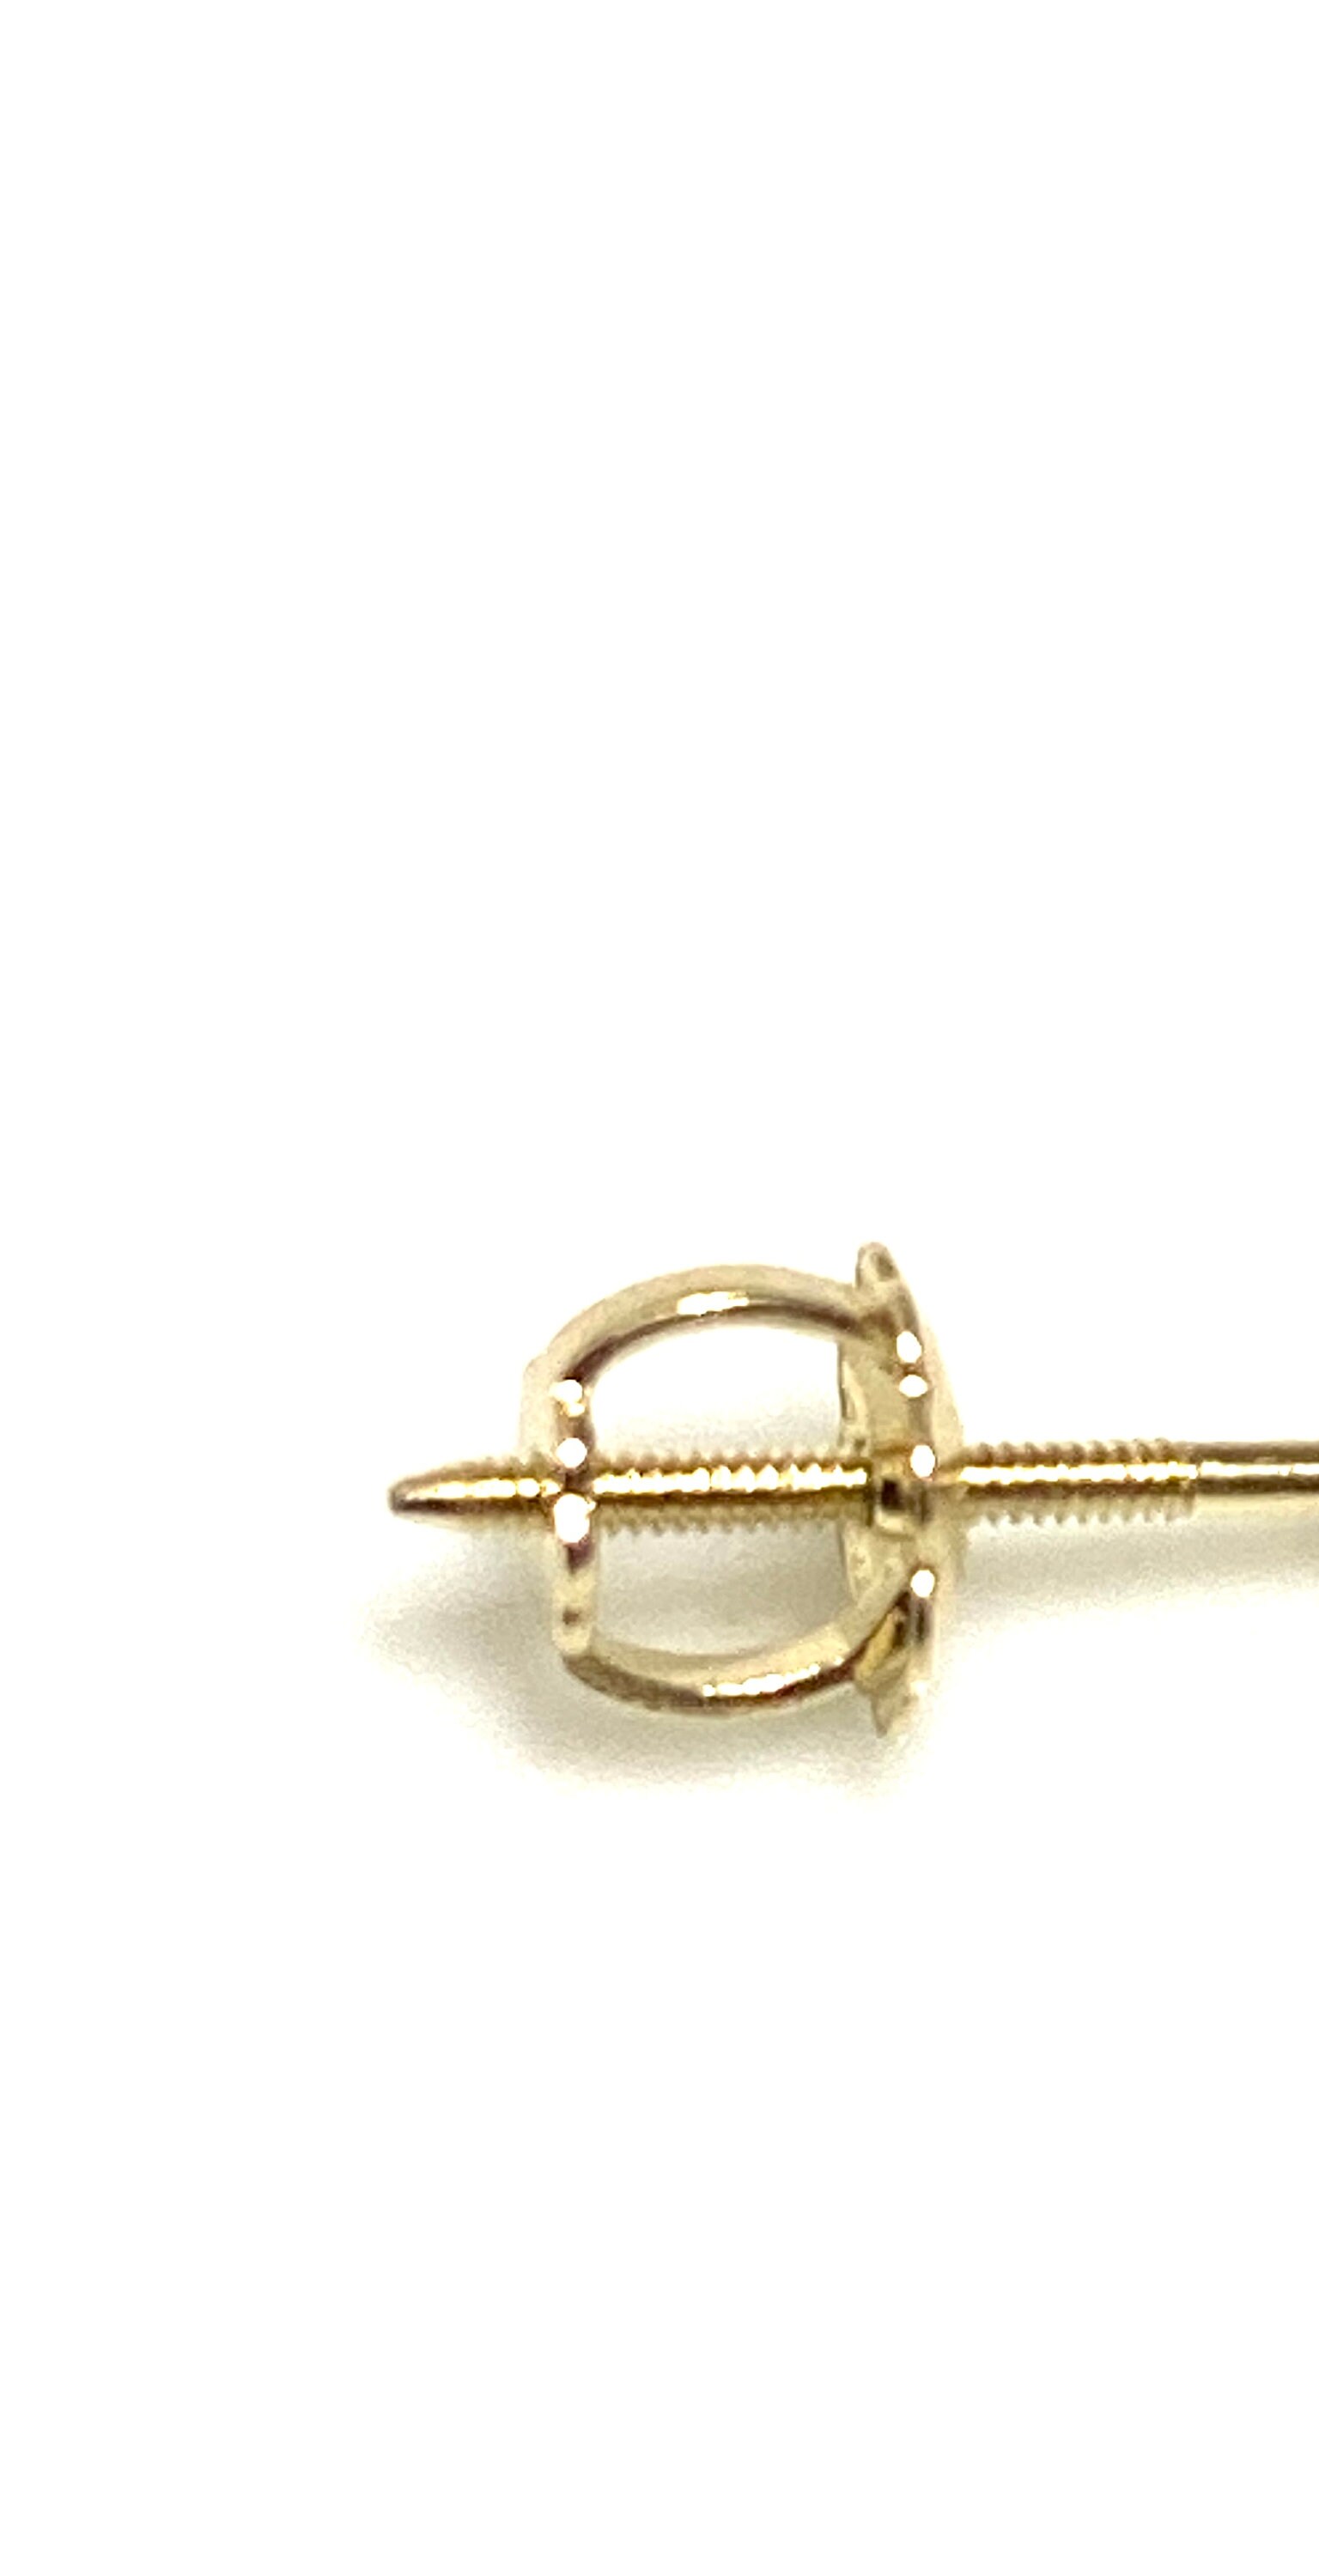 Screw Back Earrings Replacement Backs Nuts 14k Solid Gold W, Y or